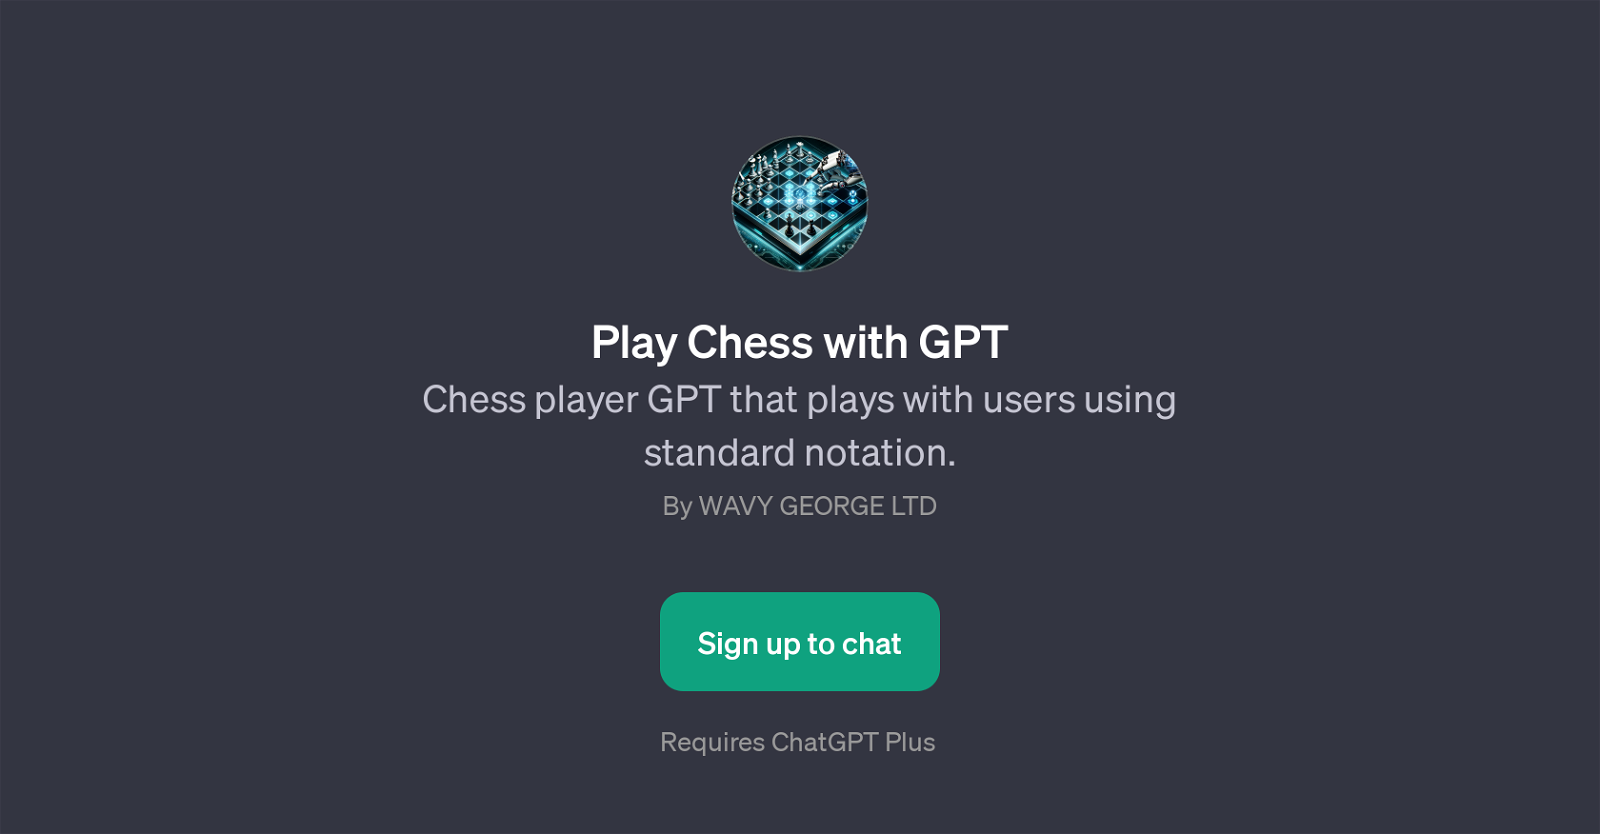 Can GPT really play chess?